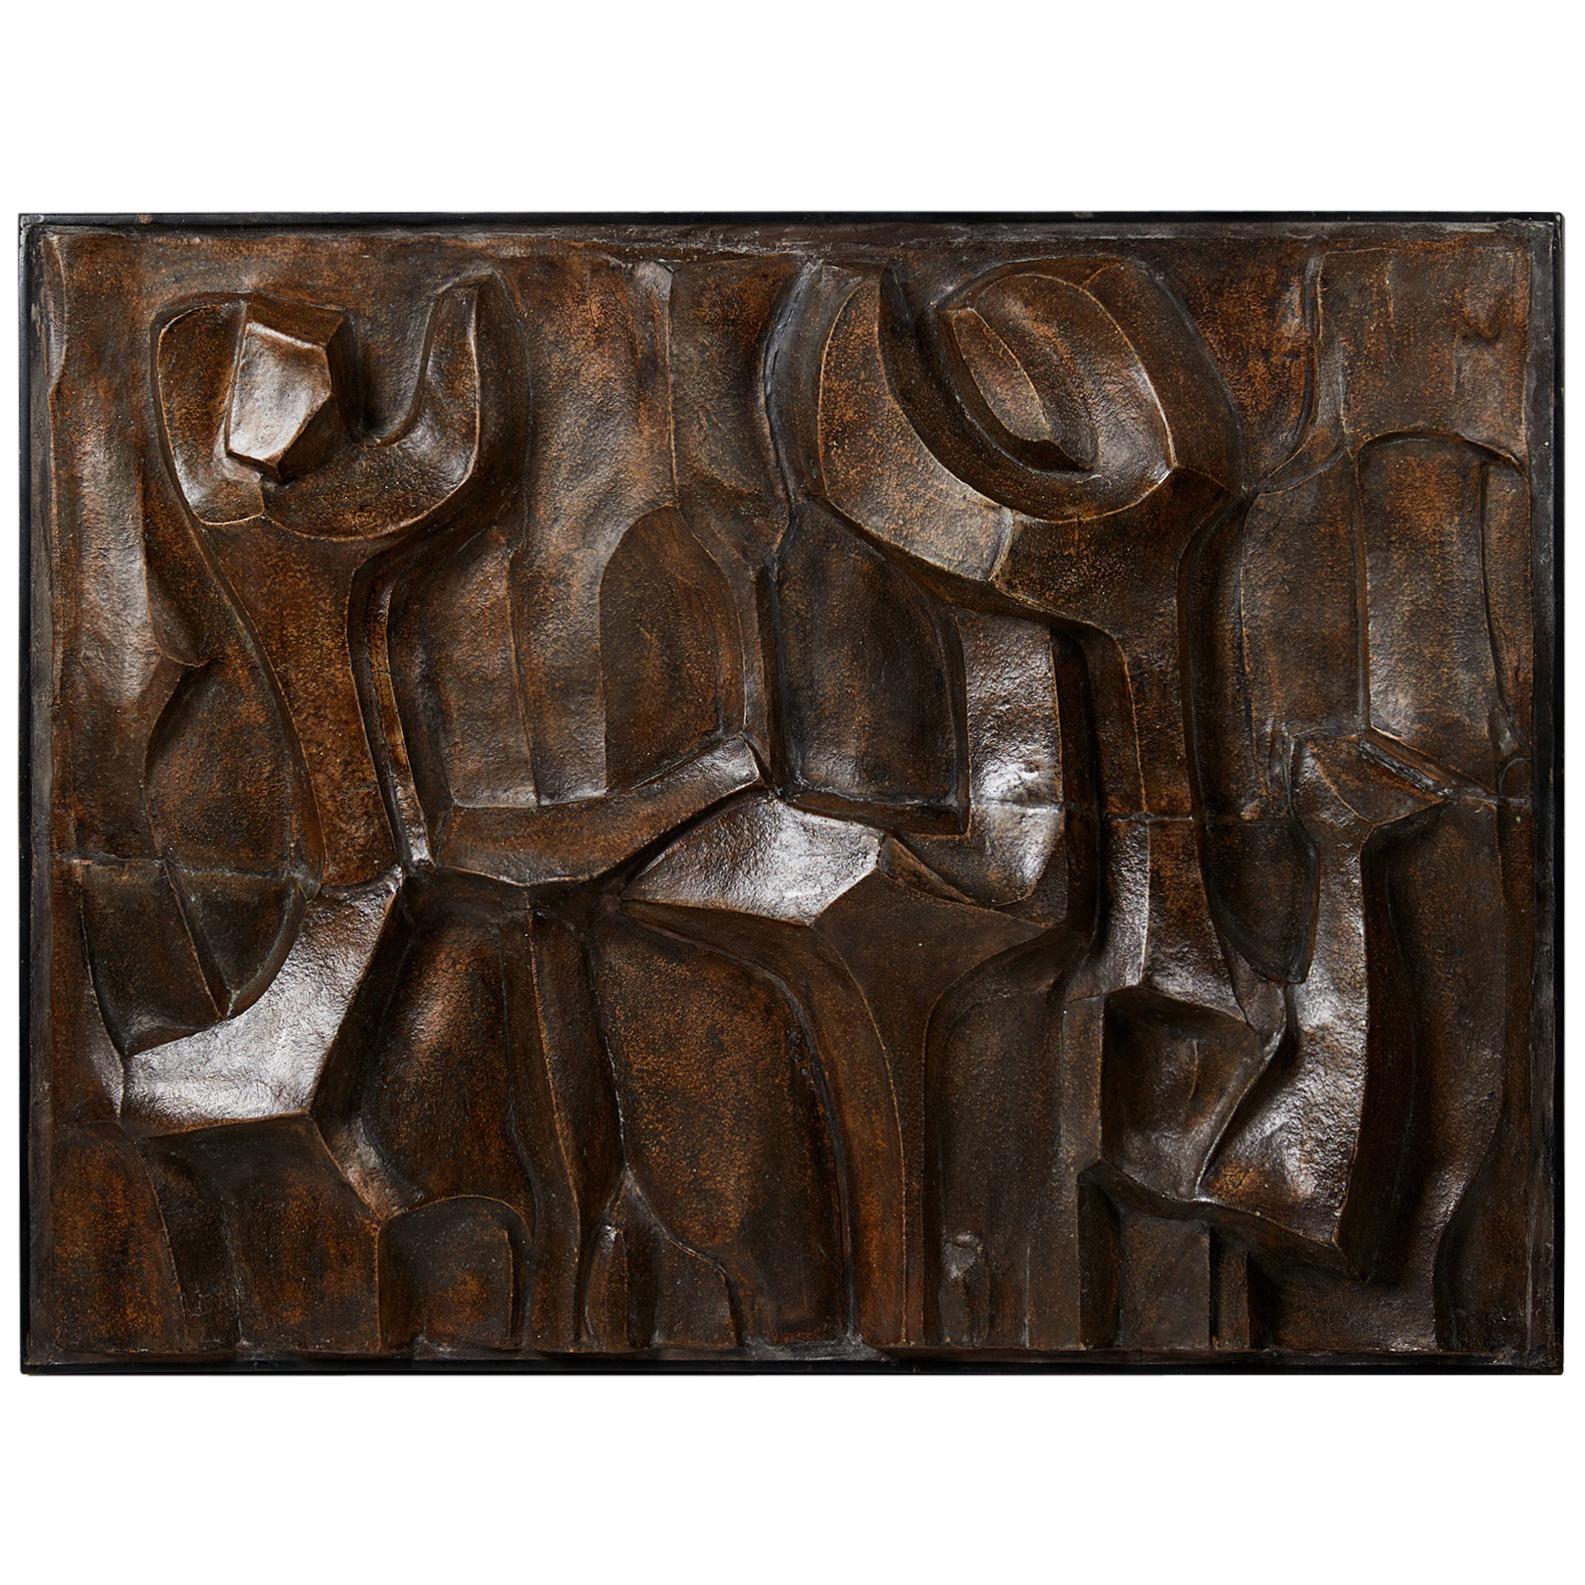 Ceramic Relief “Figures” by Pipin Henderson Denmark, 1990s